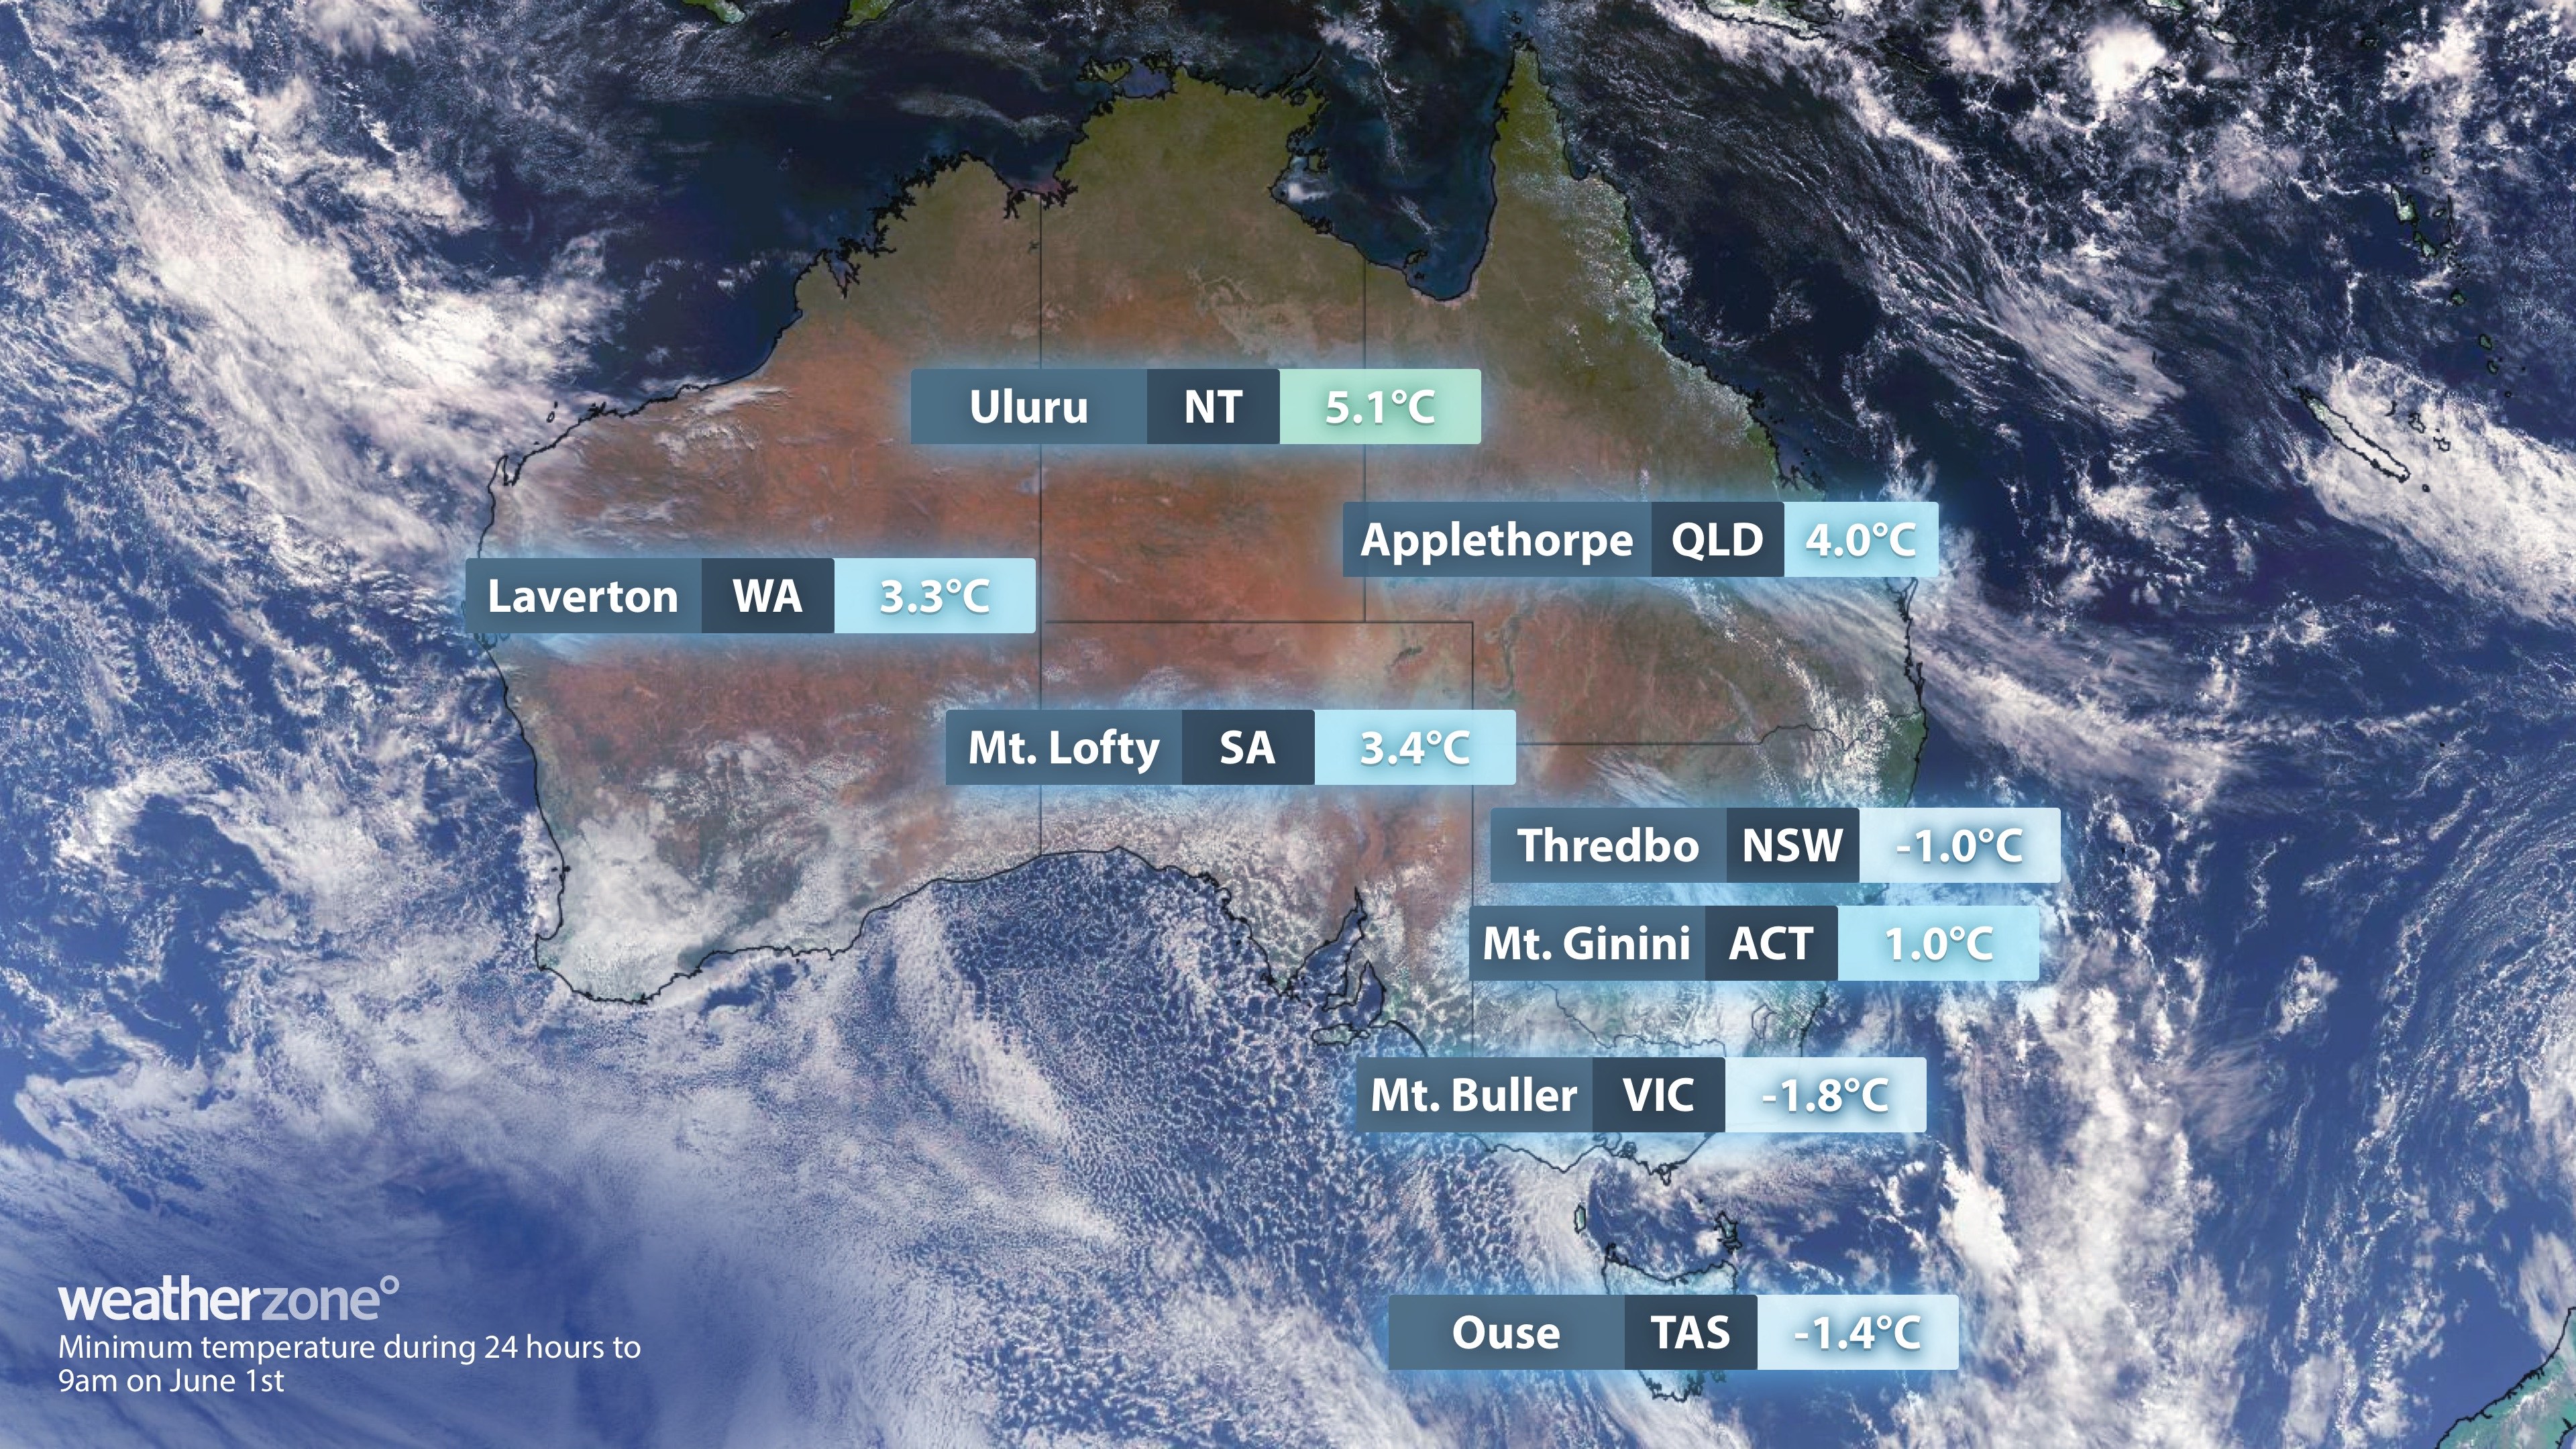 Who had the coldest start to winter in Australia this year?